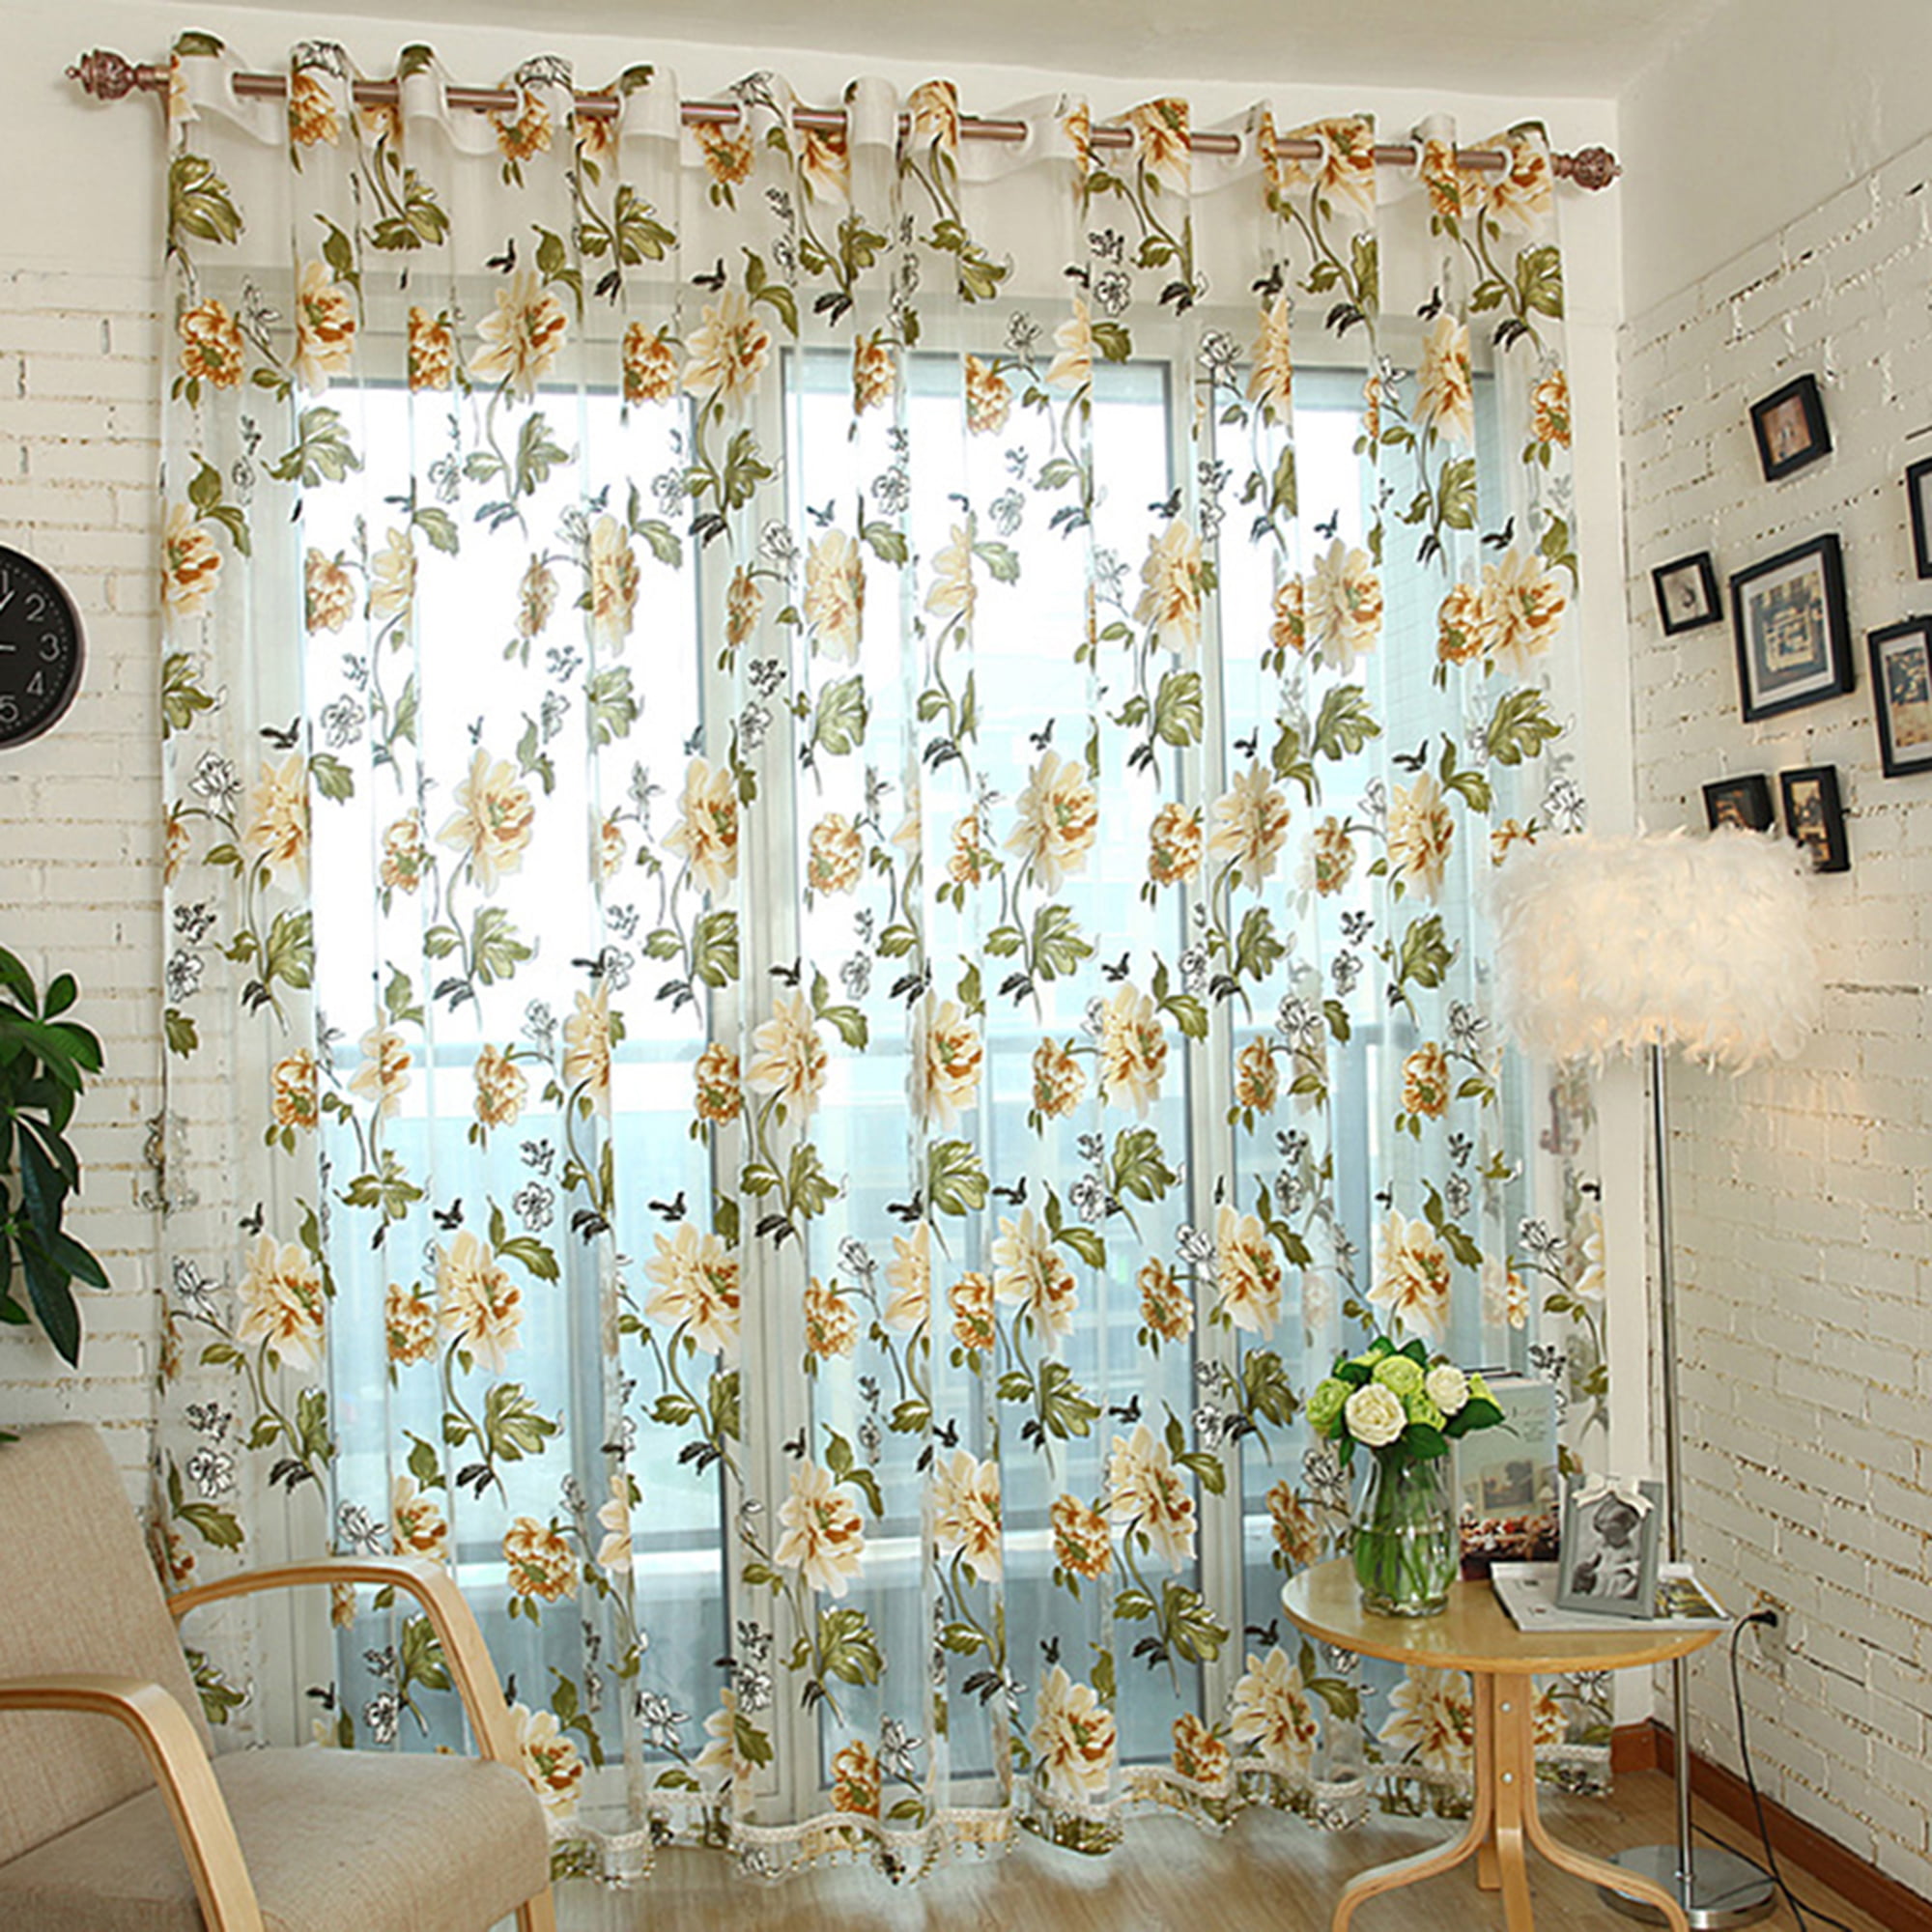 Eyelet Floral Sheer Voile Window Curtains Drapes Living Room Door Divider Tulle 